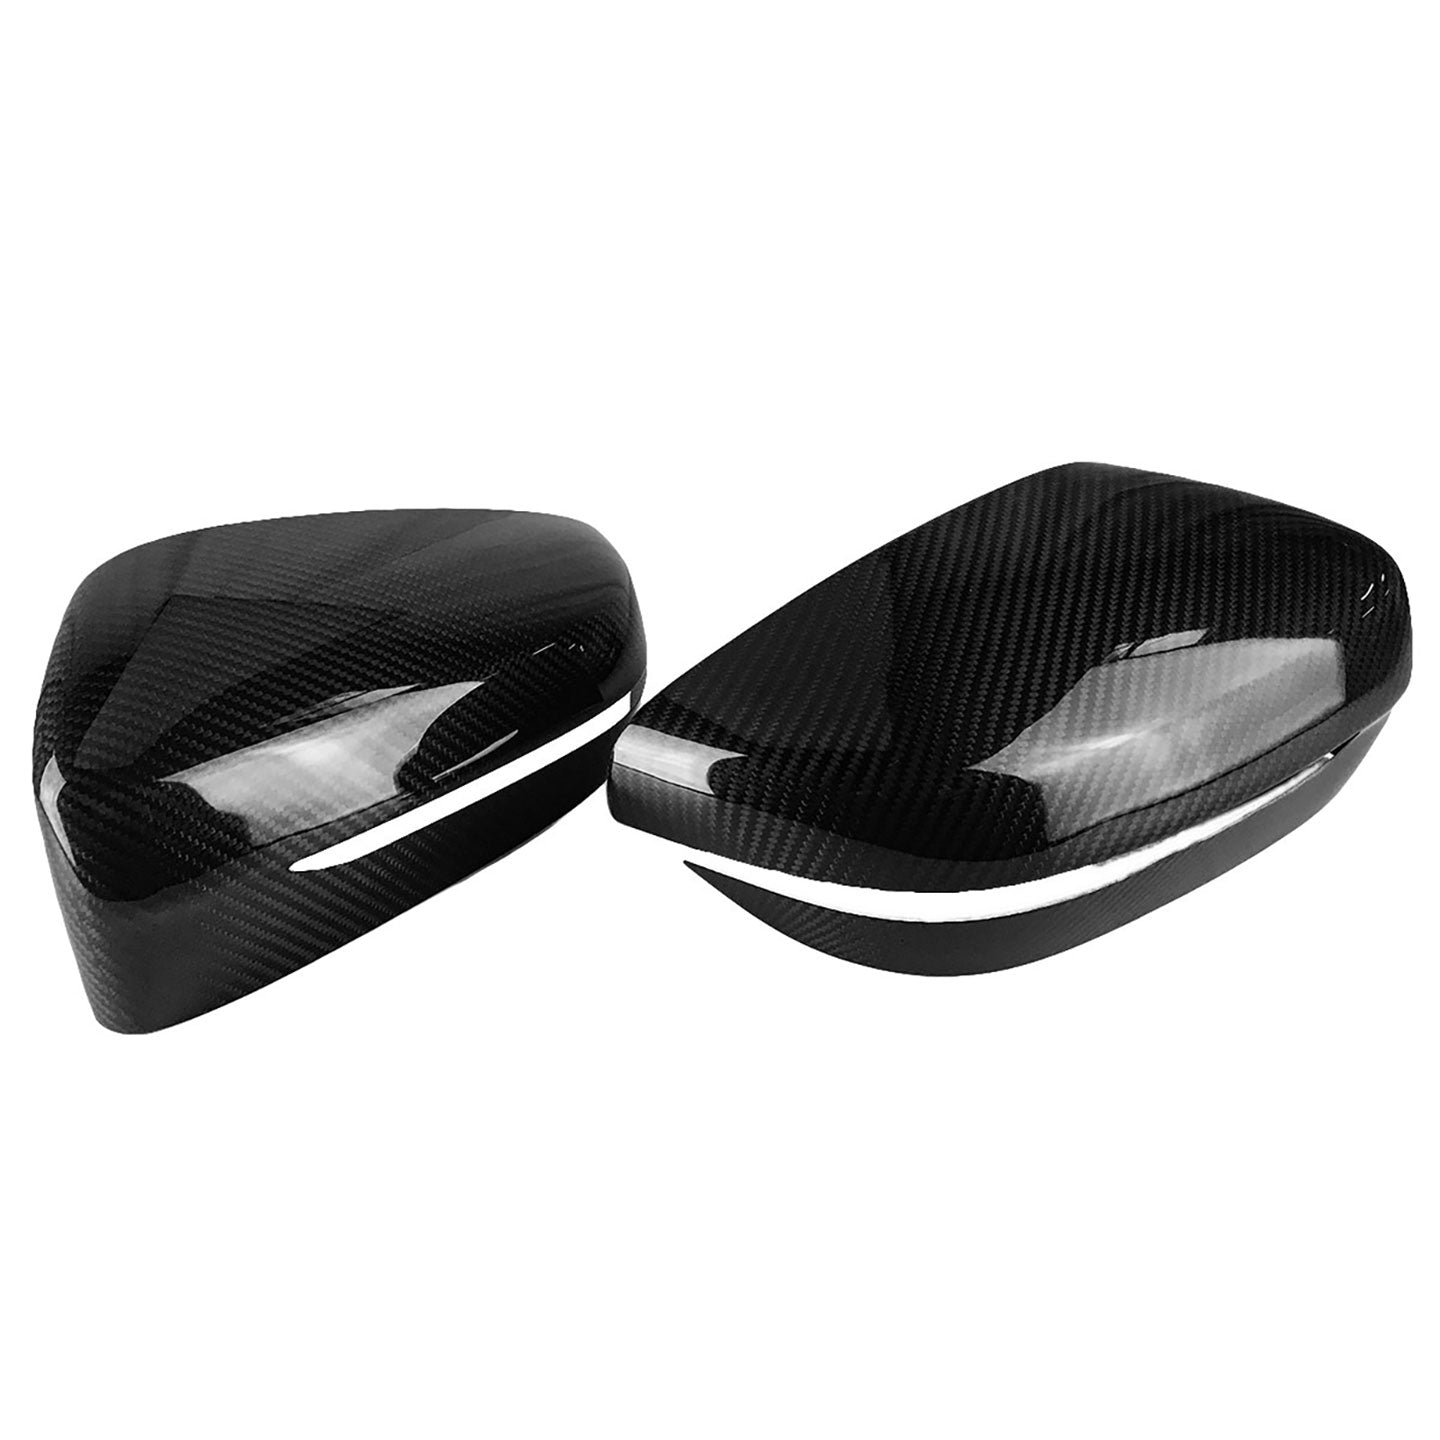 2017-2020 BMW 5 Series (G30) - Carbon Fiber Side View Mirror Cover